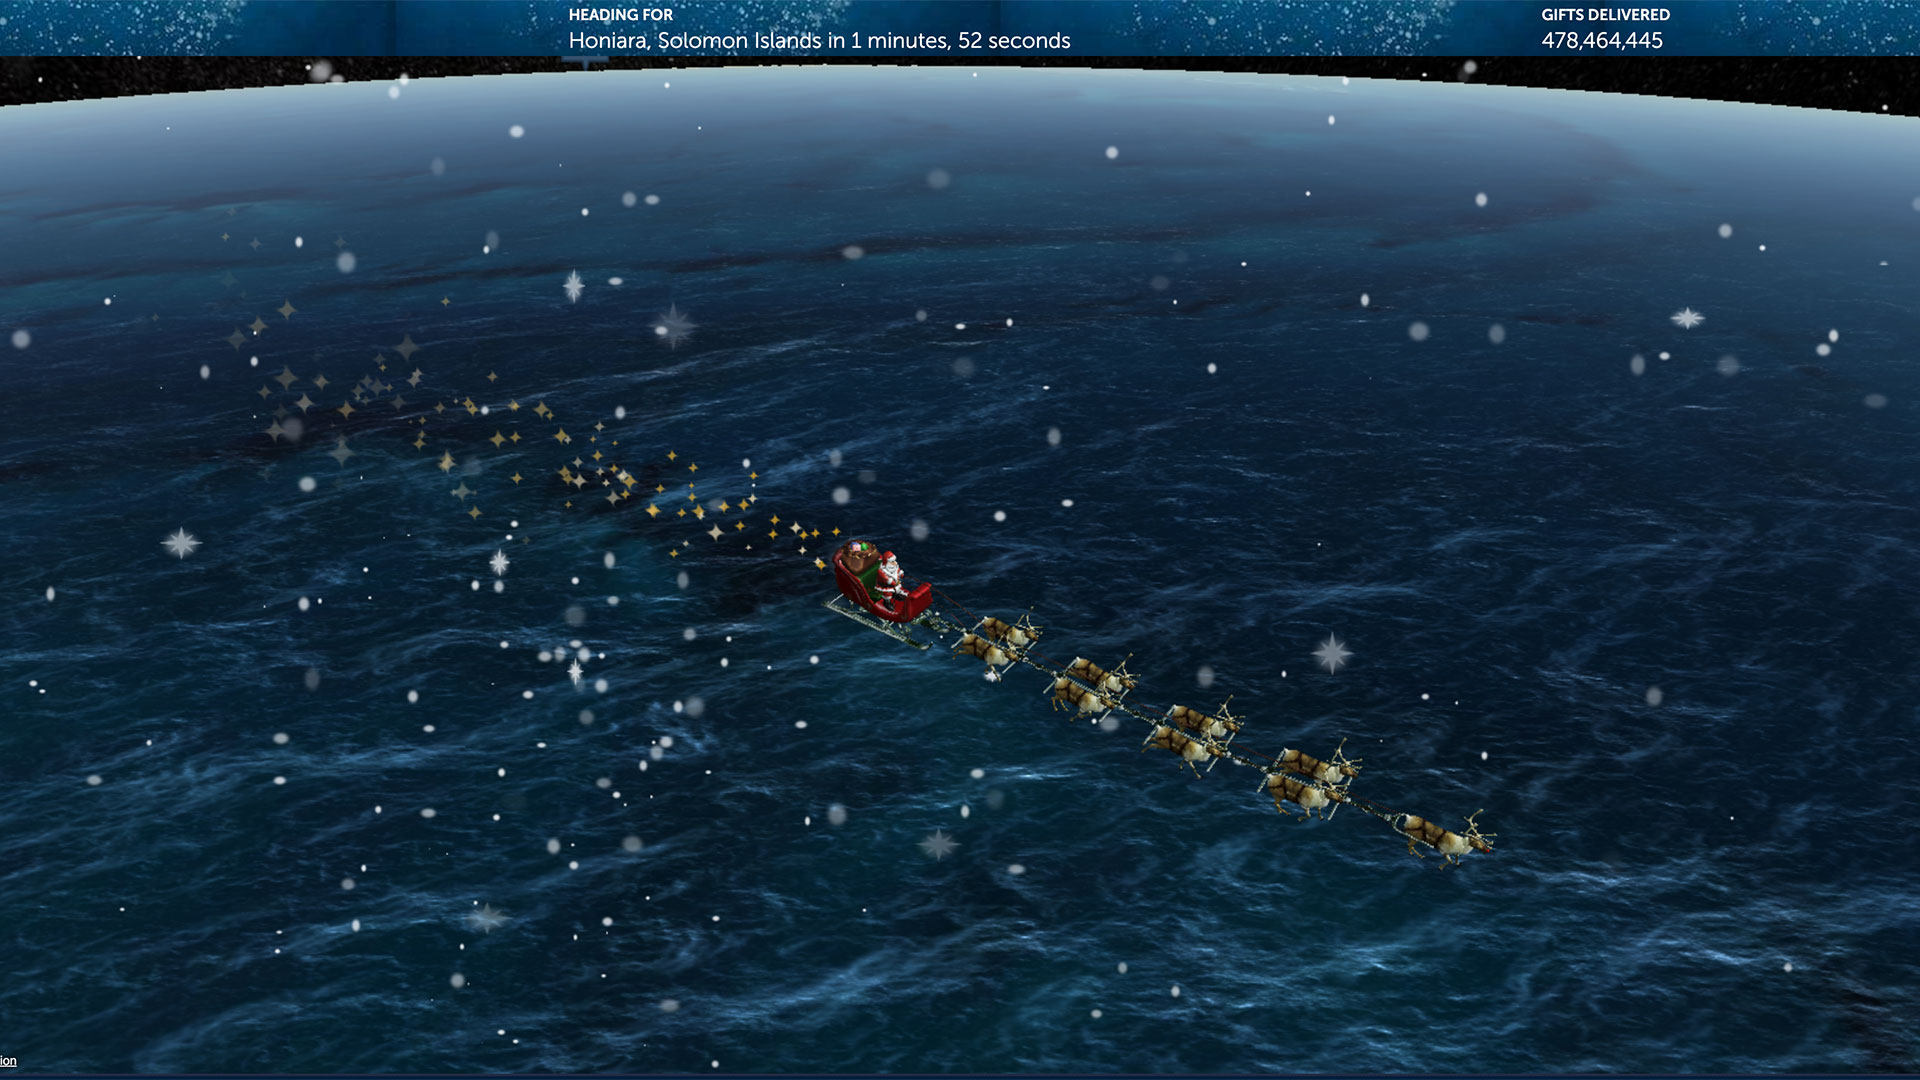 Santa on a sleigh moving across the Pacific towards the Solomon Islands